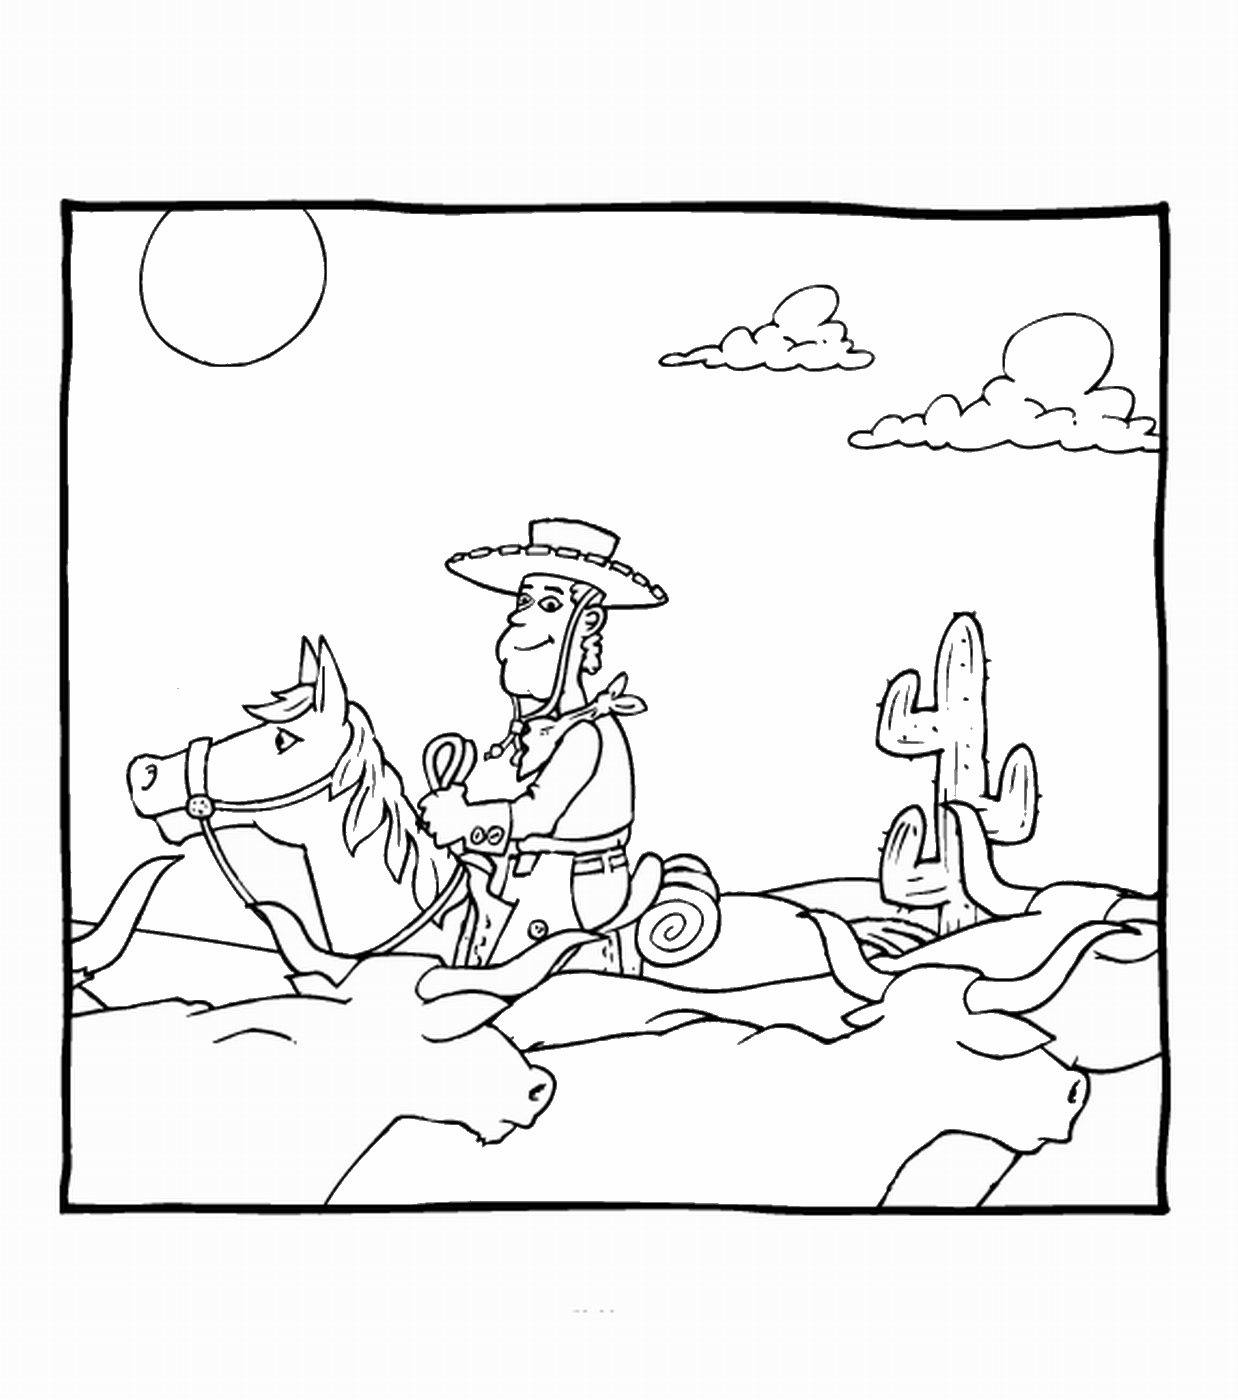 Cowboy Coloring Pages for boys cowboy_12 Printable 2020 0187 Coloring4free